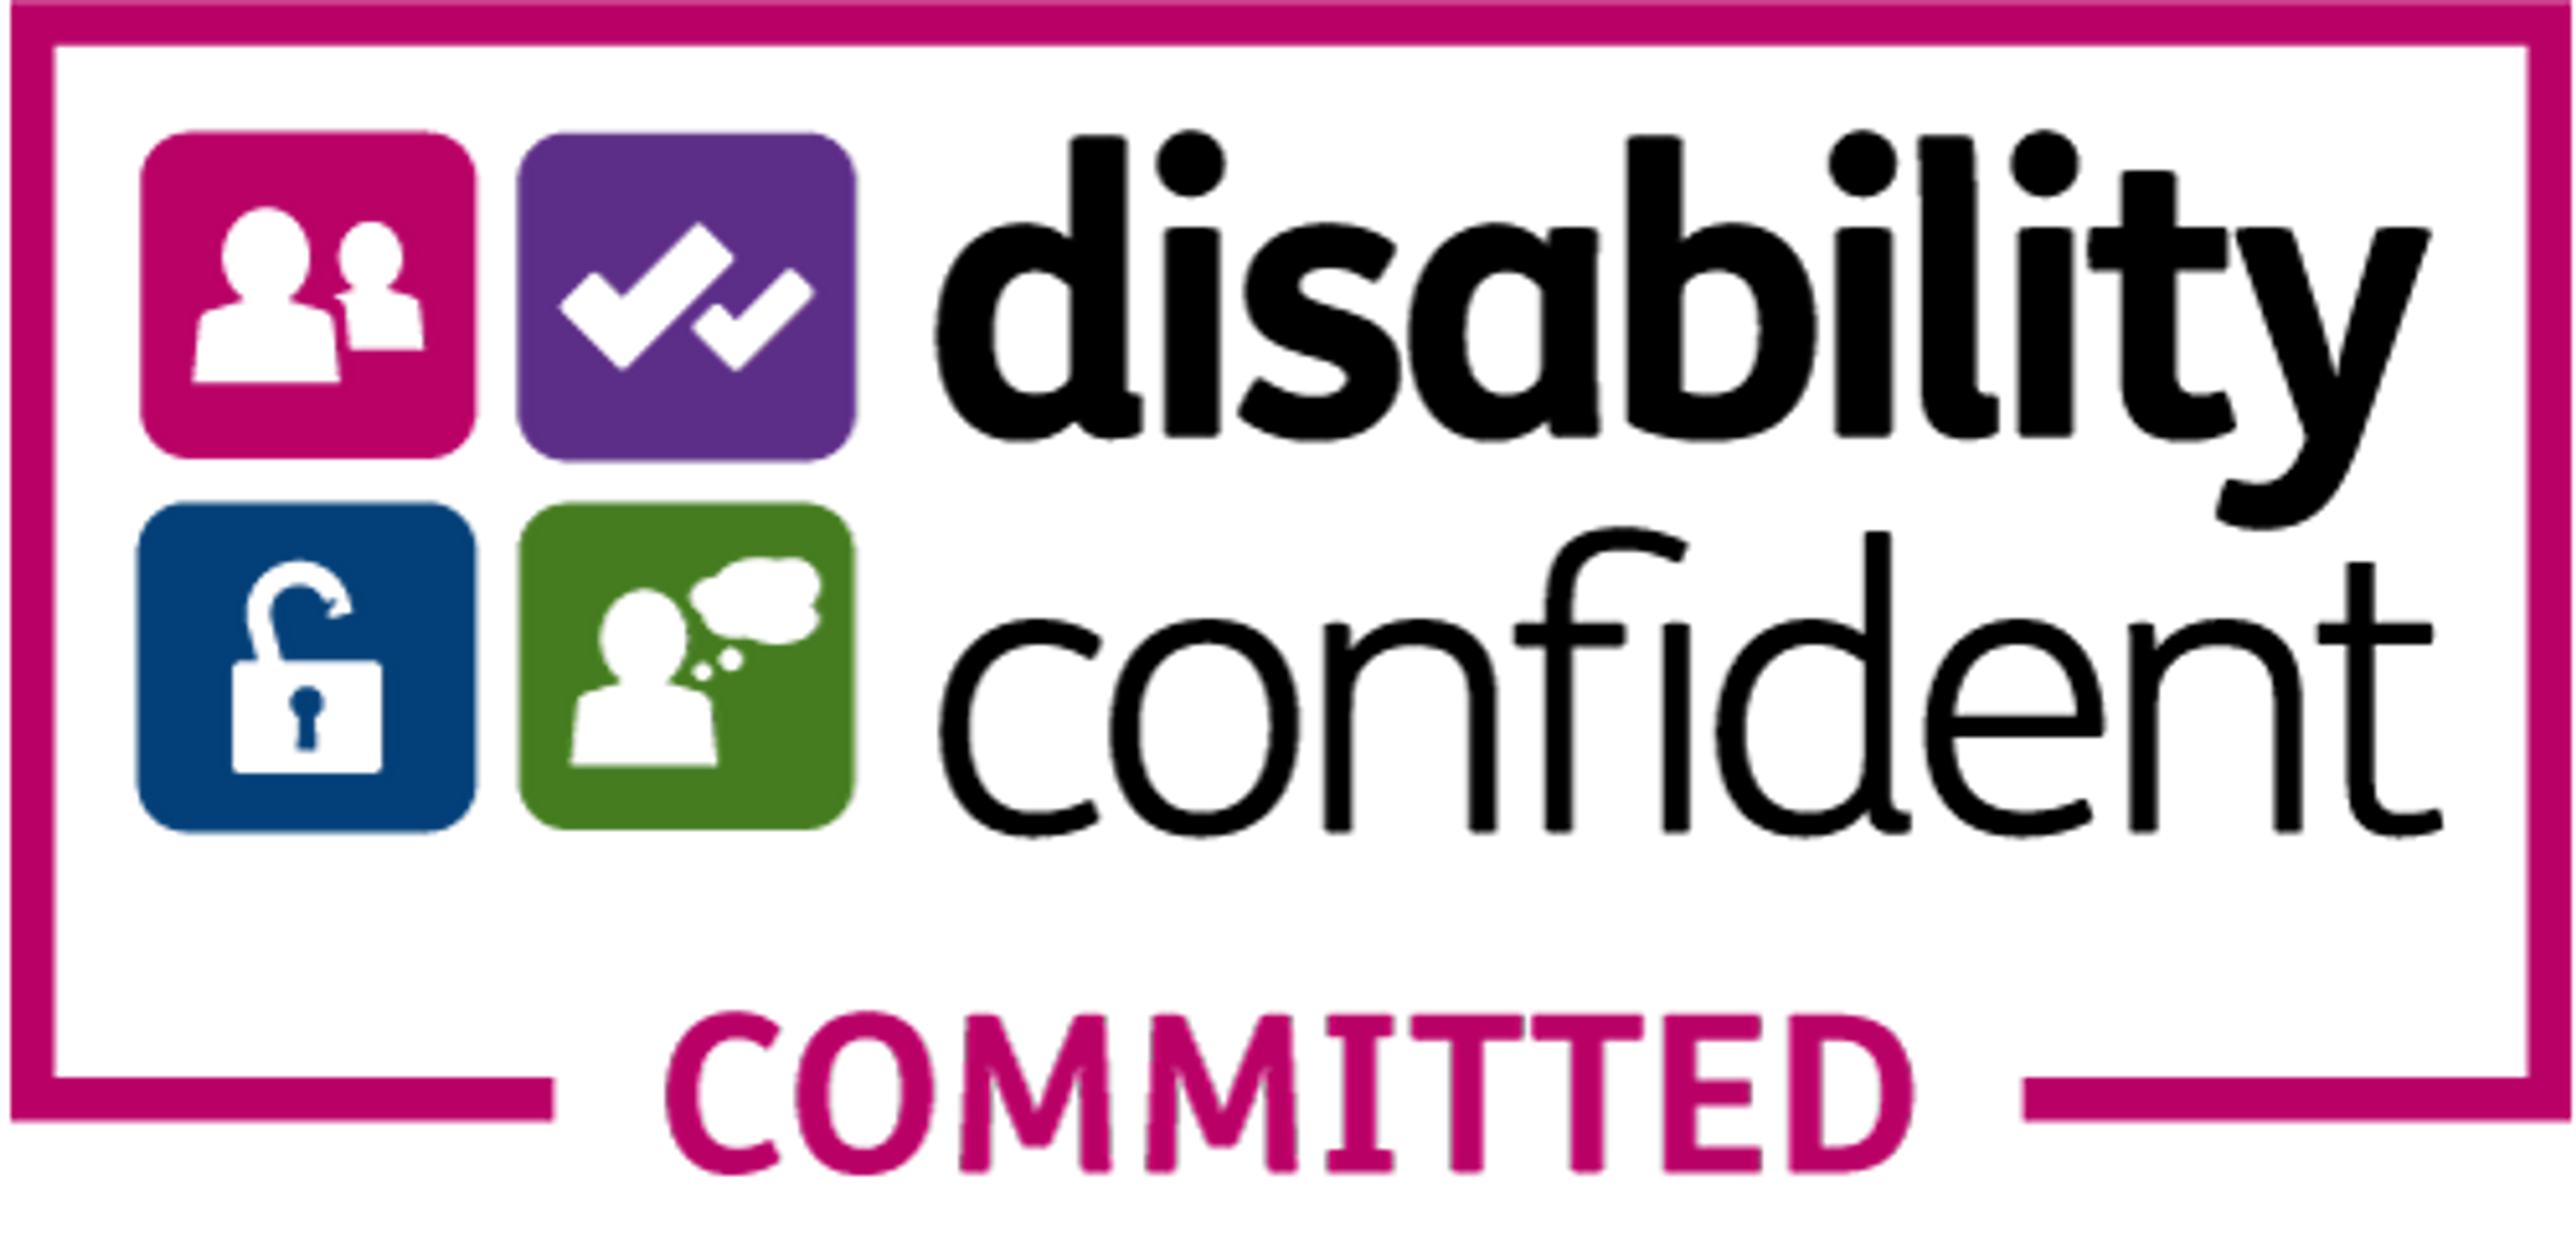 disability confident committed logo